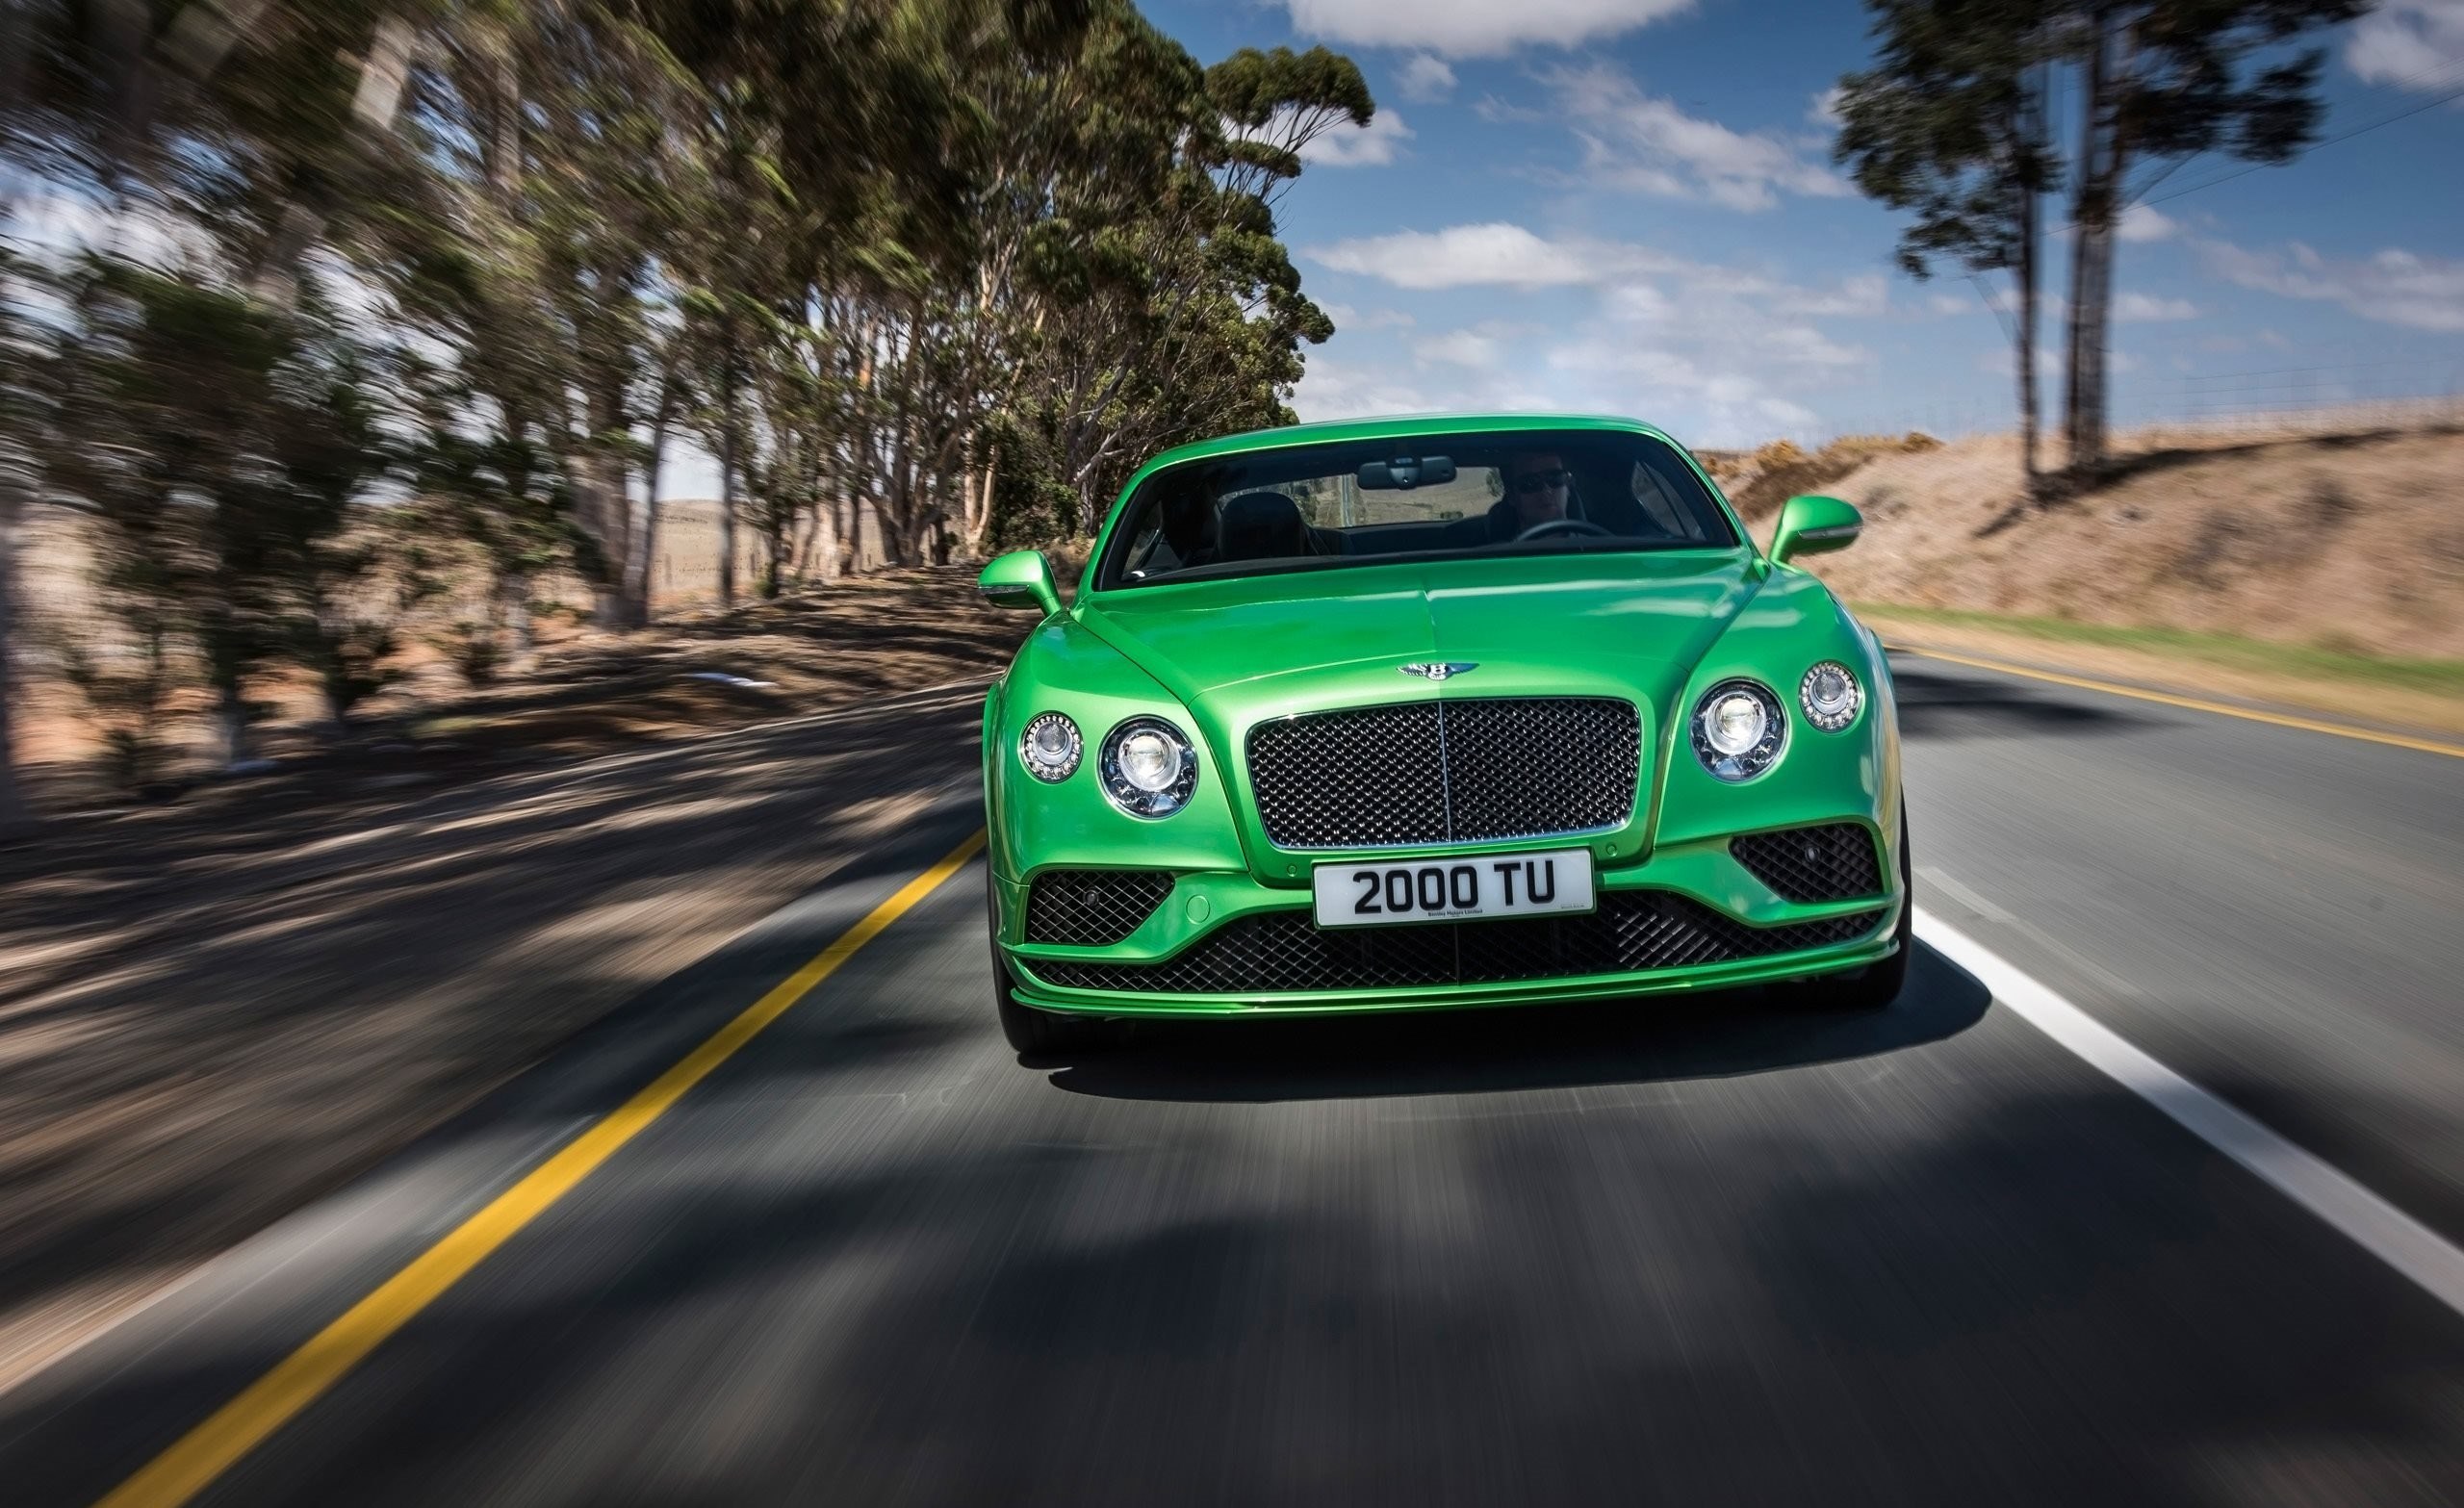 Bentley Continental Gt 2016 Hd Cars 4k Wallpapers Images Backgrounds Photos And Pictures